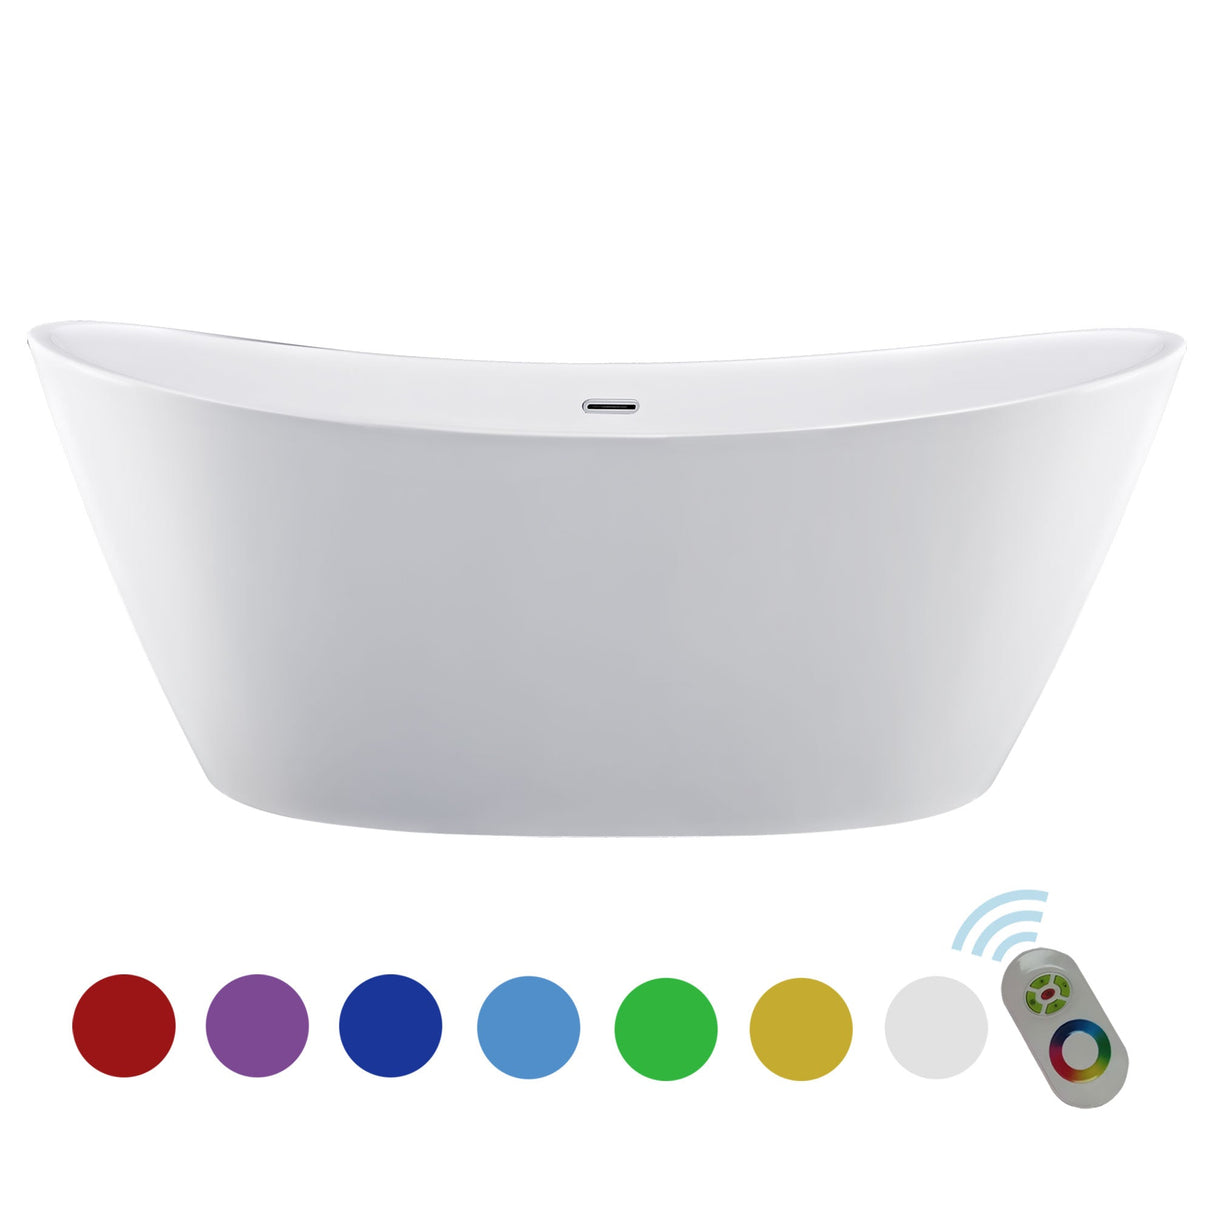 Empava-67FT1518LED freestanding acrylic soaking oval modern white SPA bathtub with LED Lights wireless remote control